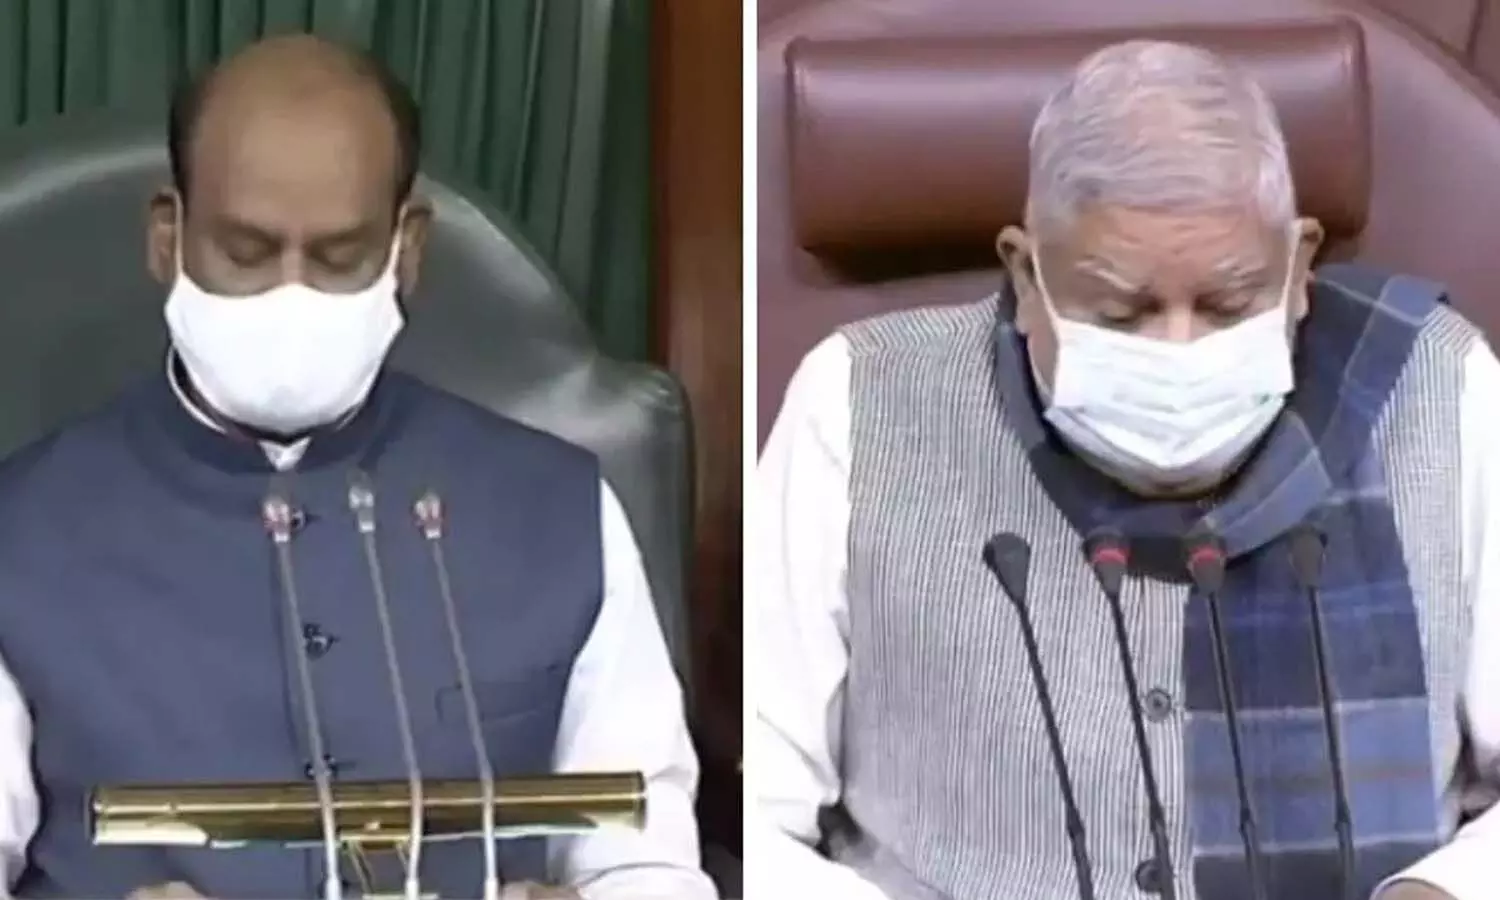 On the day of the return of the mask in Parliament, it was made mandatory for all MPs, the speaker appealed to be cautious